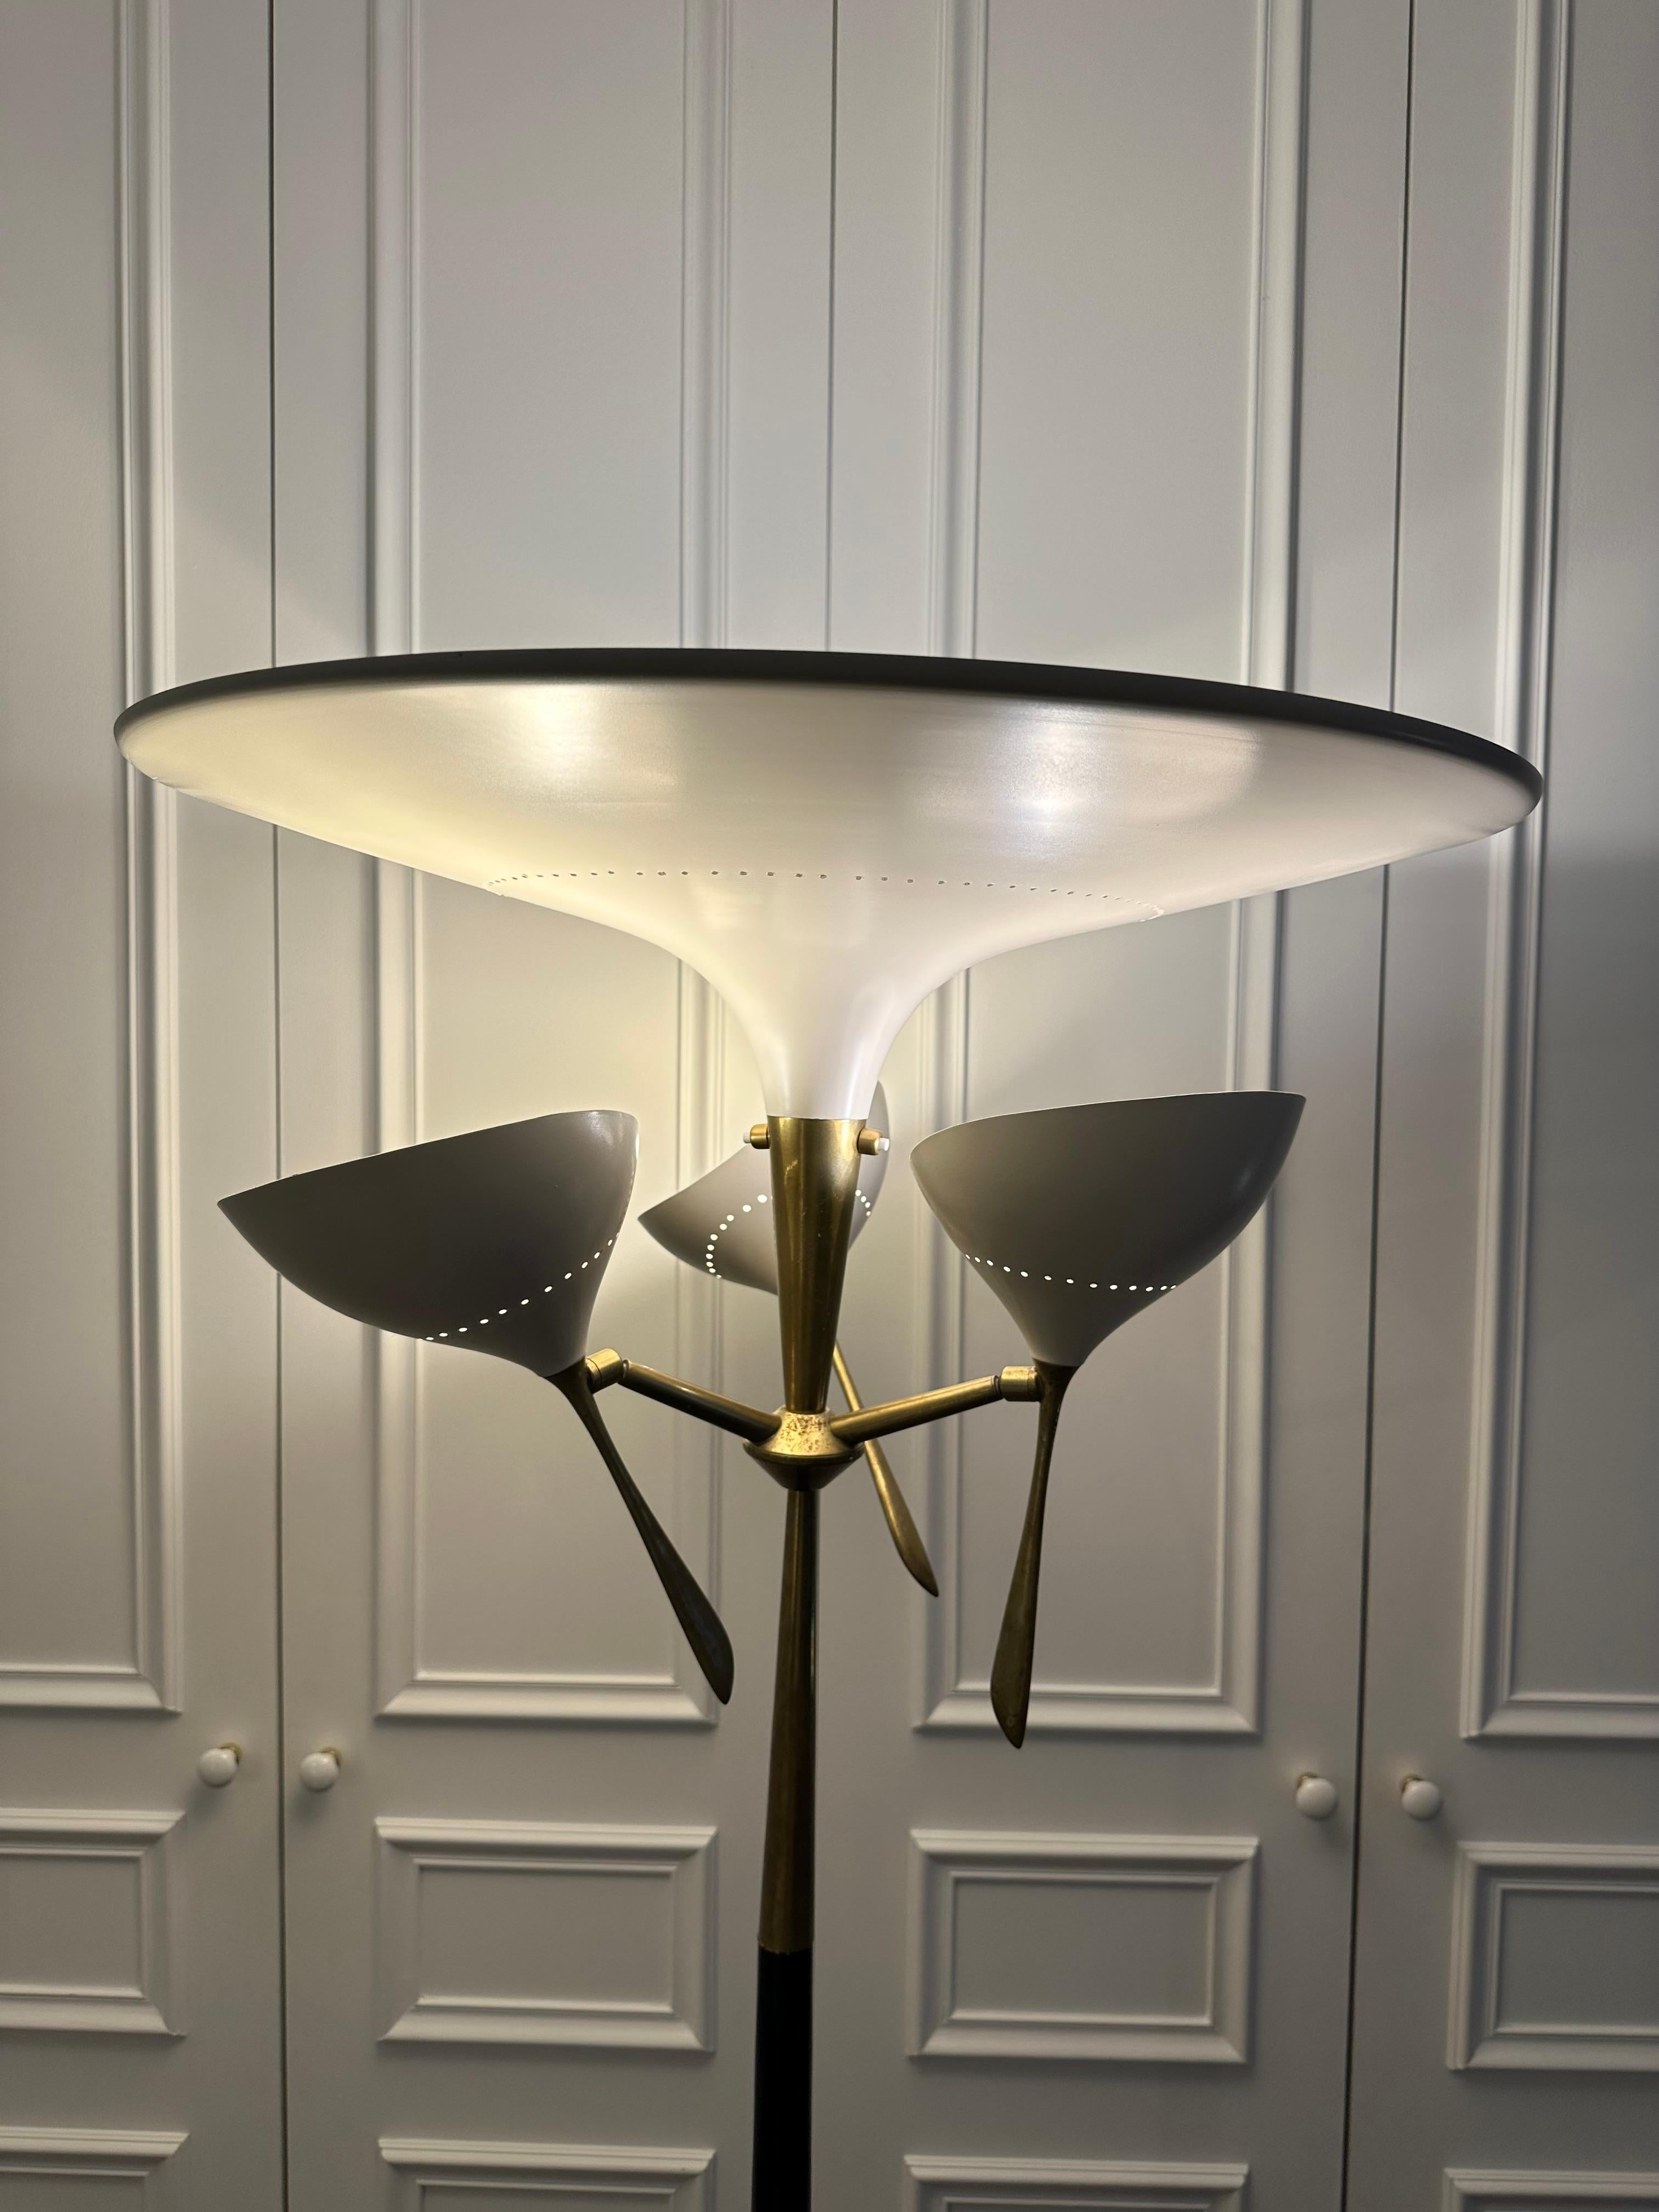 Very rare modernist floor lamp Mid-Century Modern late 40s beginning of 50s, lacquered metal and brass by the manufacture Lumen, design attributed to Angelo Lelii. Famous design like Stilnovo, Arteluce, Arredoluce, Angelo Brotto, Esperia.